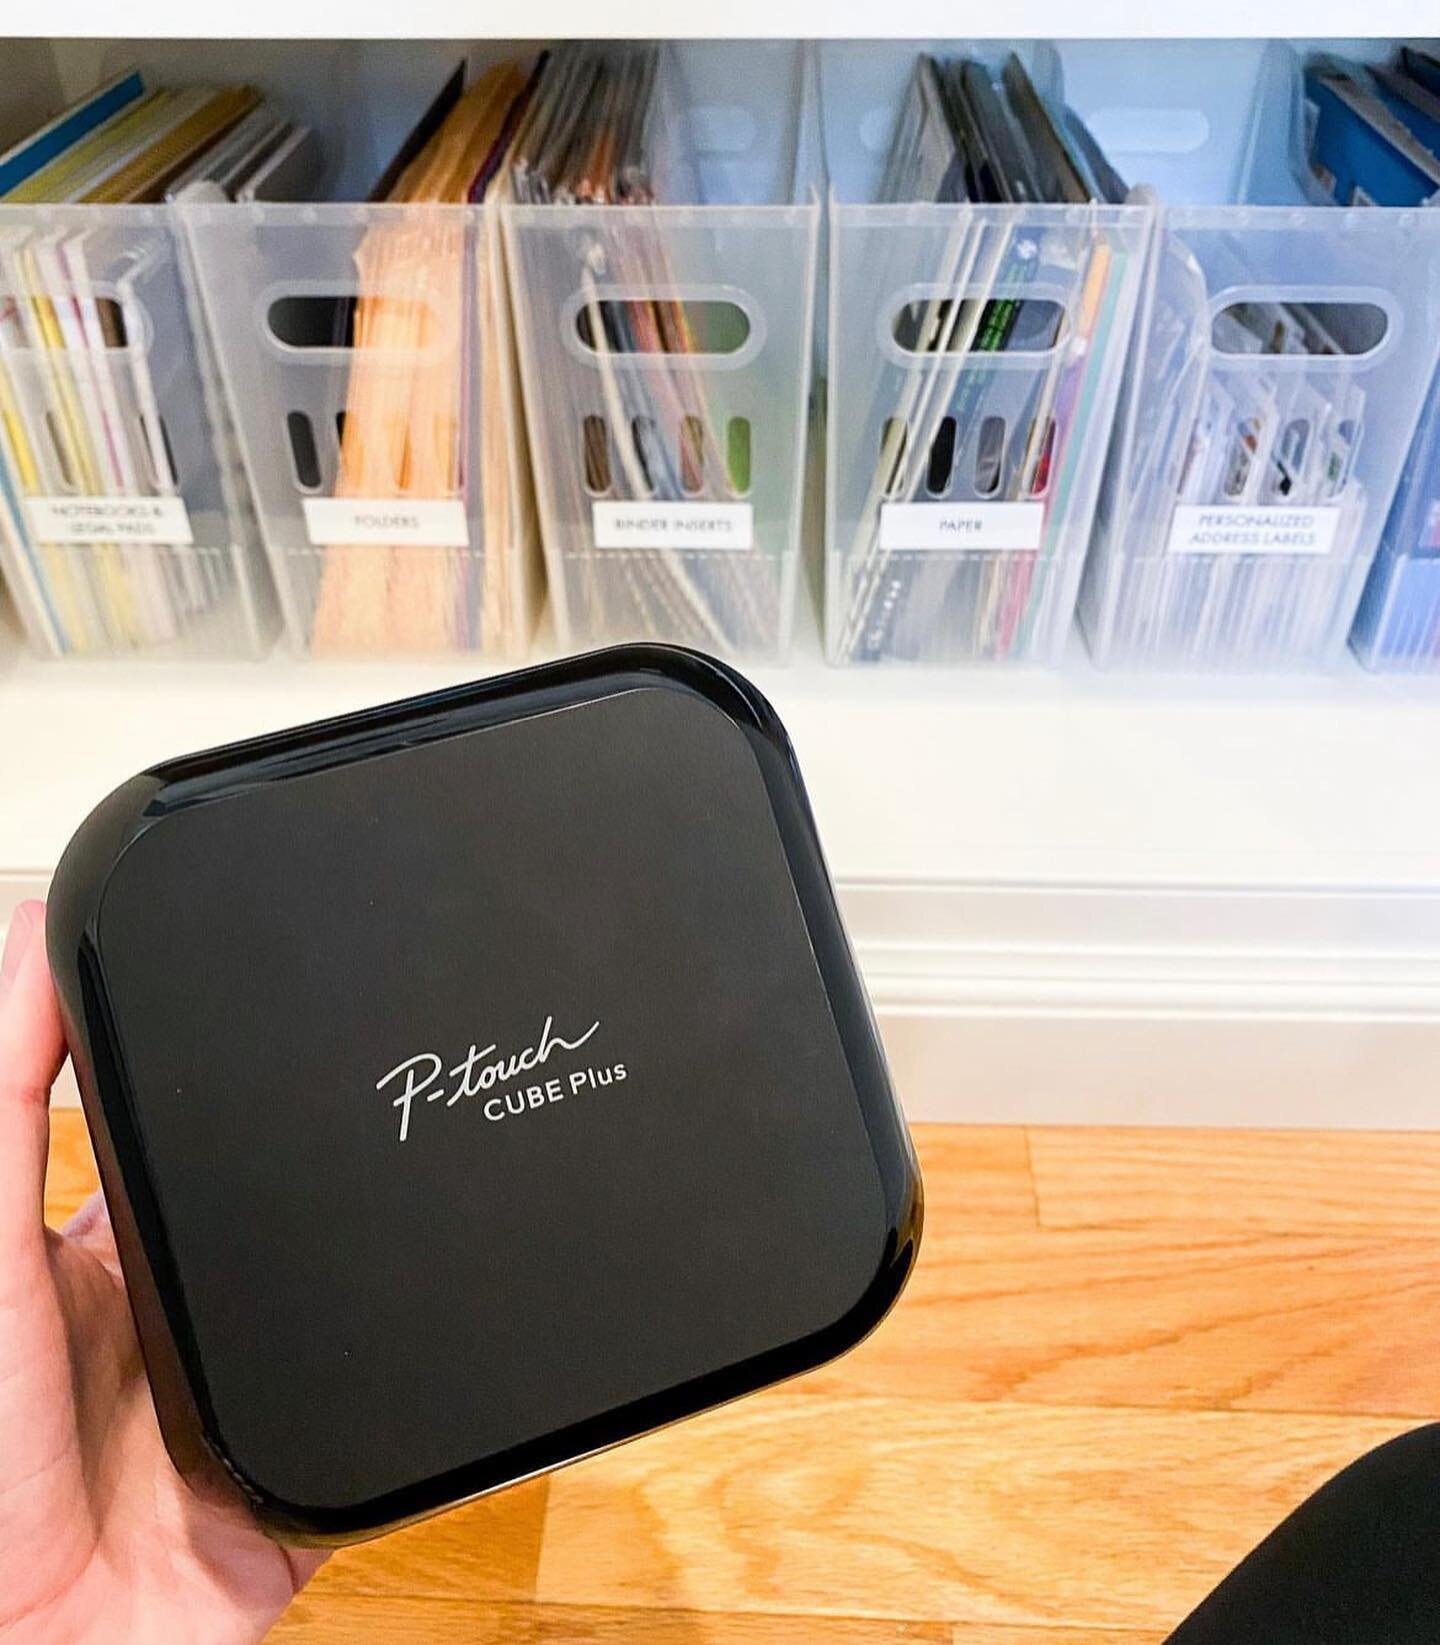 Answering one of your frequently asked questions: what do we use to create labels?

We bring the P-touch cube plus and Cricut Joy along with us on every job.

The P-touch prints labels quickly &amp; is super easy to use overall. I have a case for it 